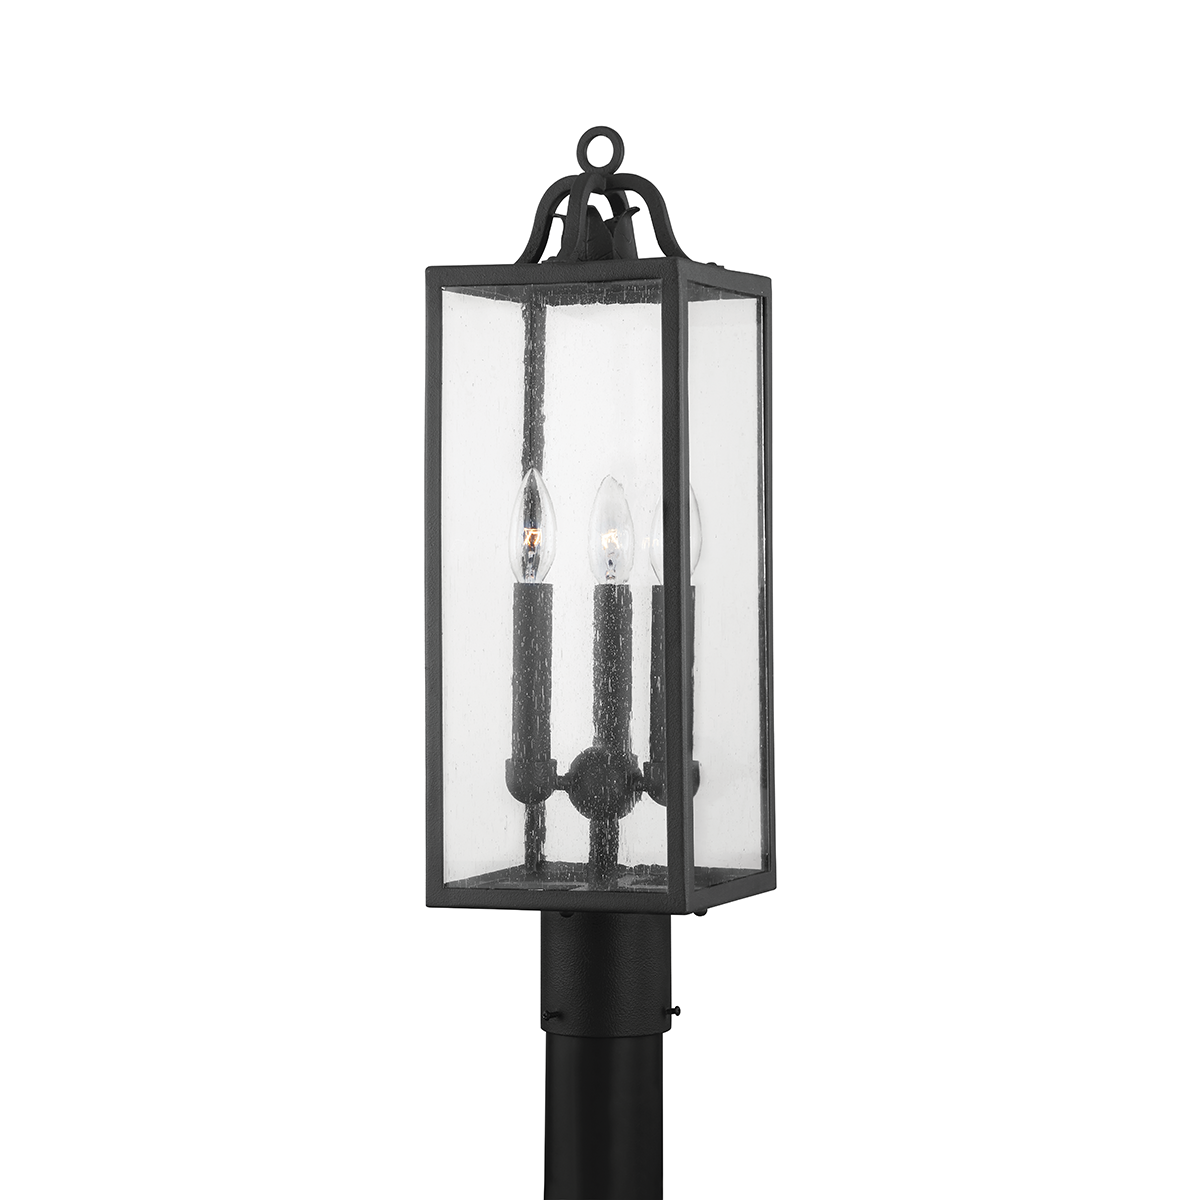 Troy CAIDEN 3 LIGHT EXTERIOR POST P2067 Outdoor l Post/Pier Mounts Troy Lighting   